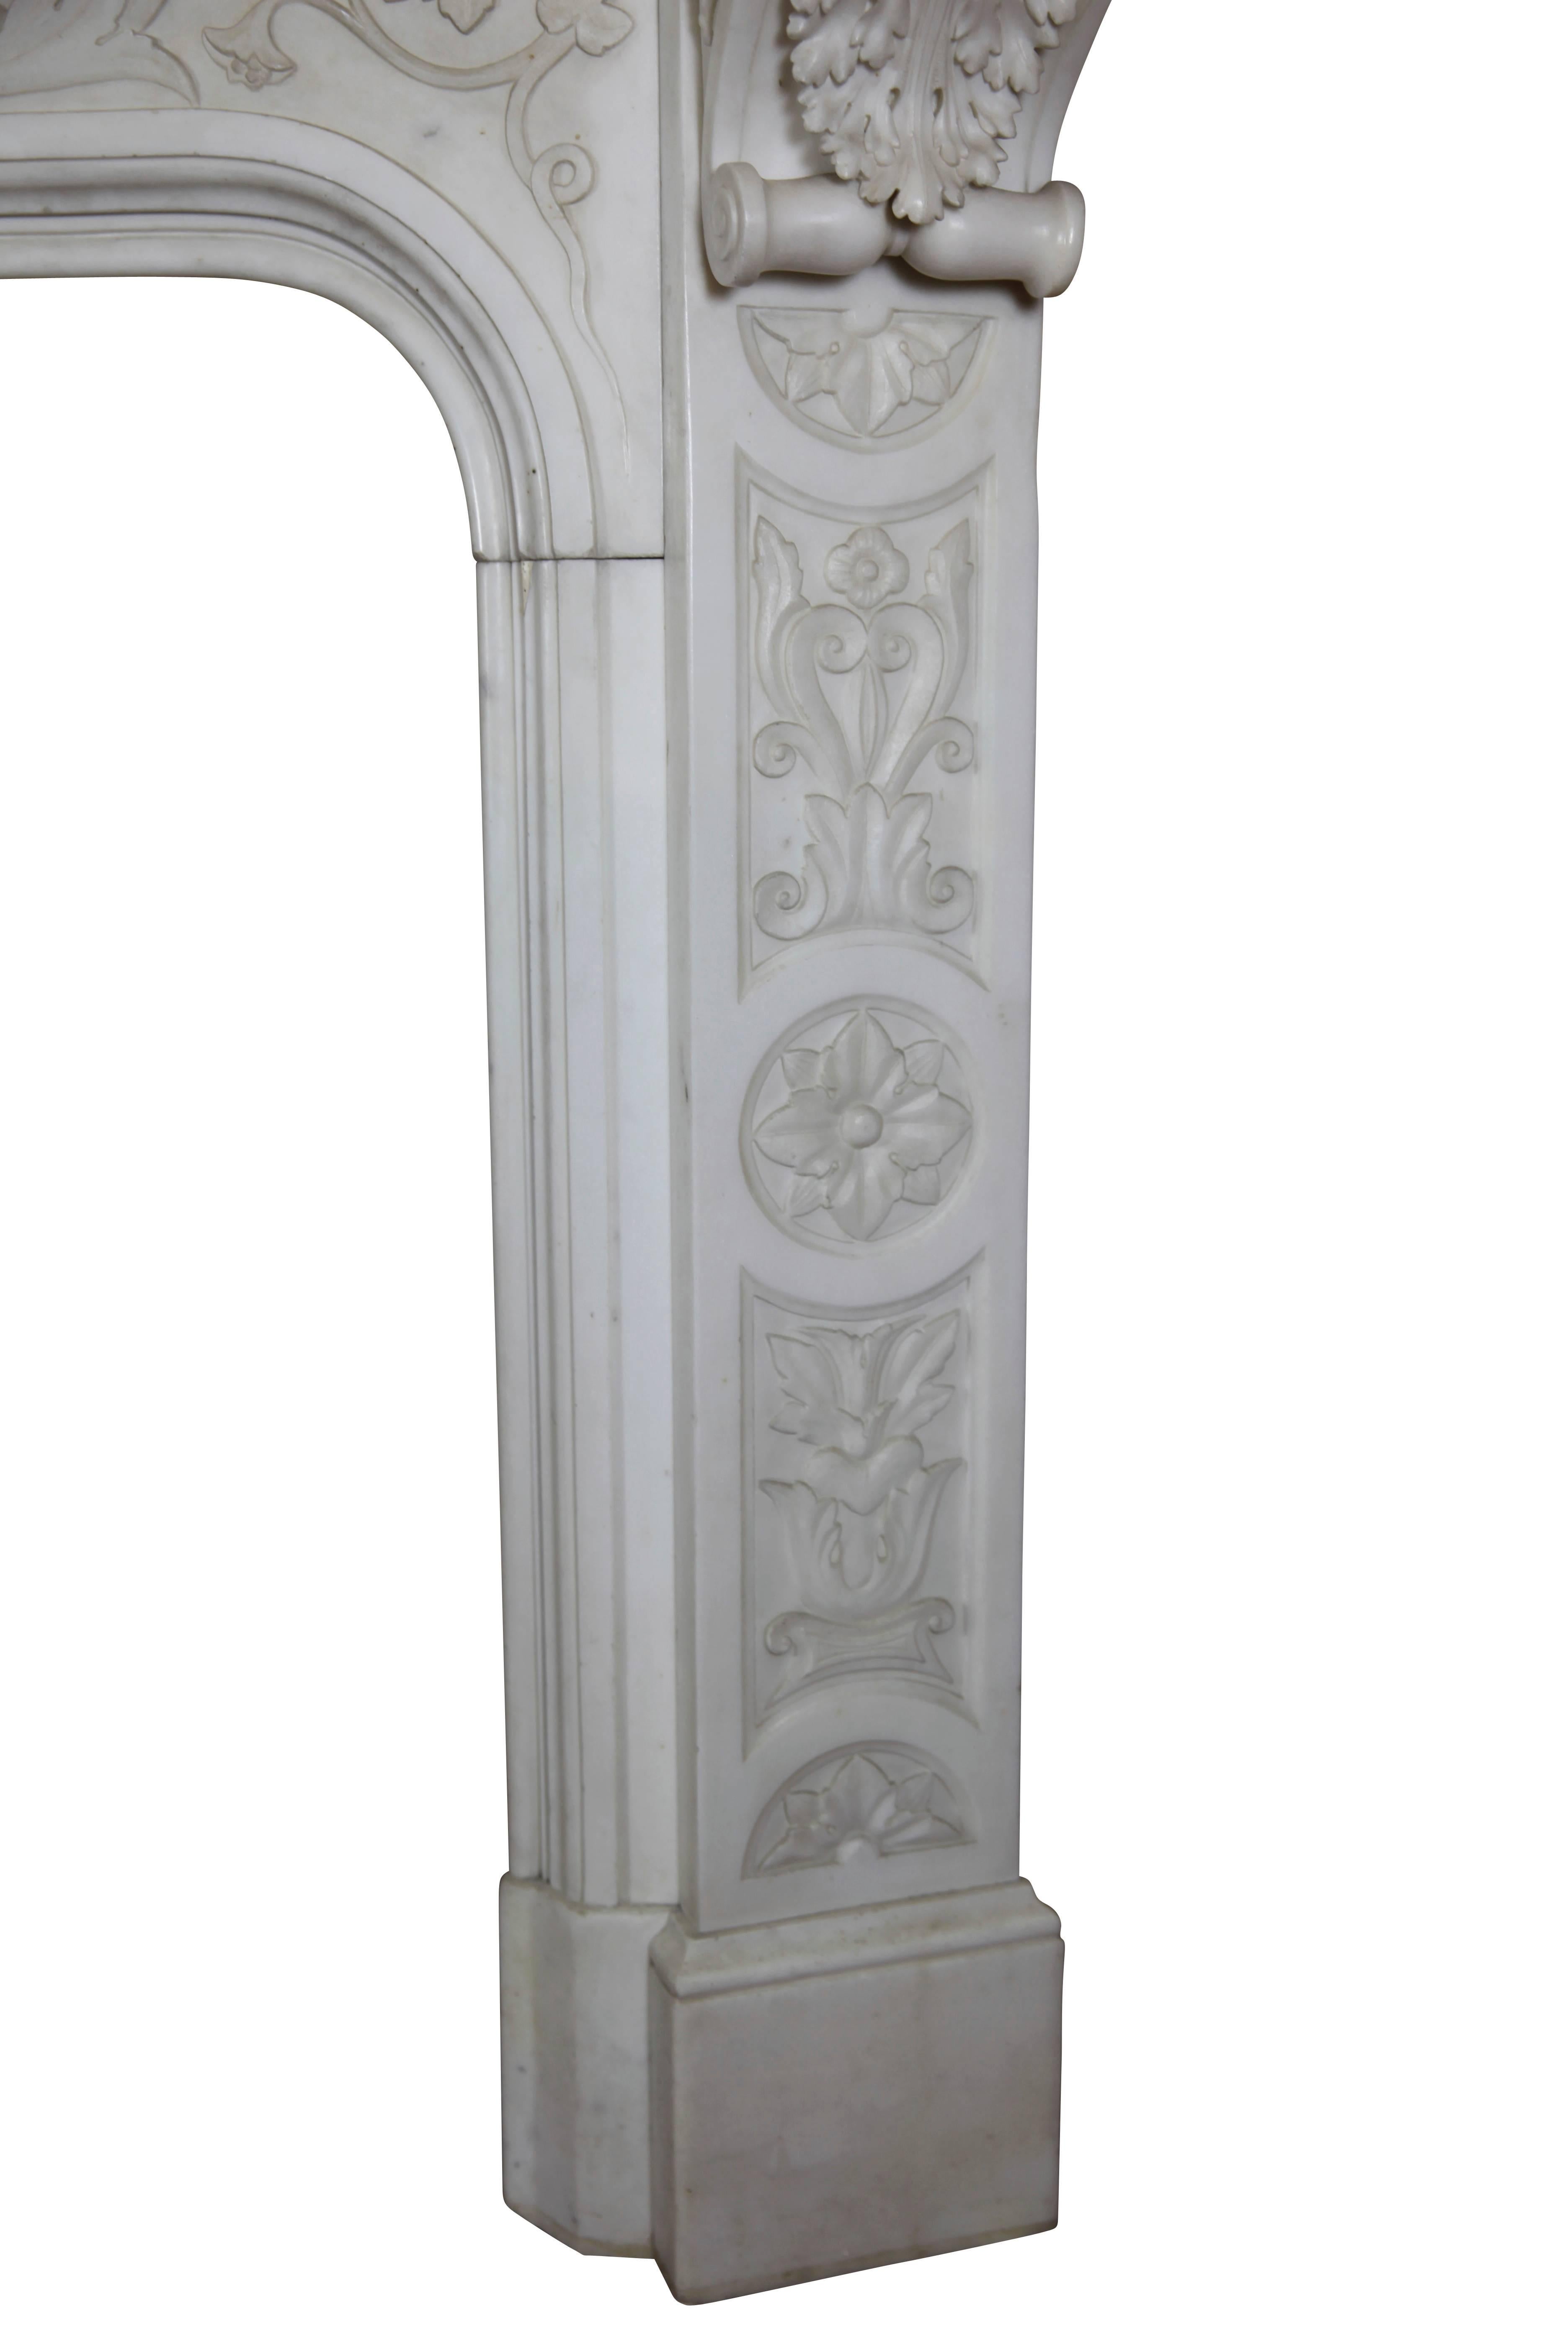 Rare 19th Century Italian White Marble Original Antique Fireplace Mantle For Sale 5